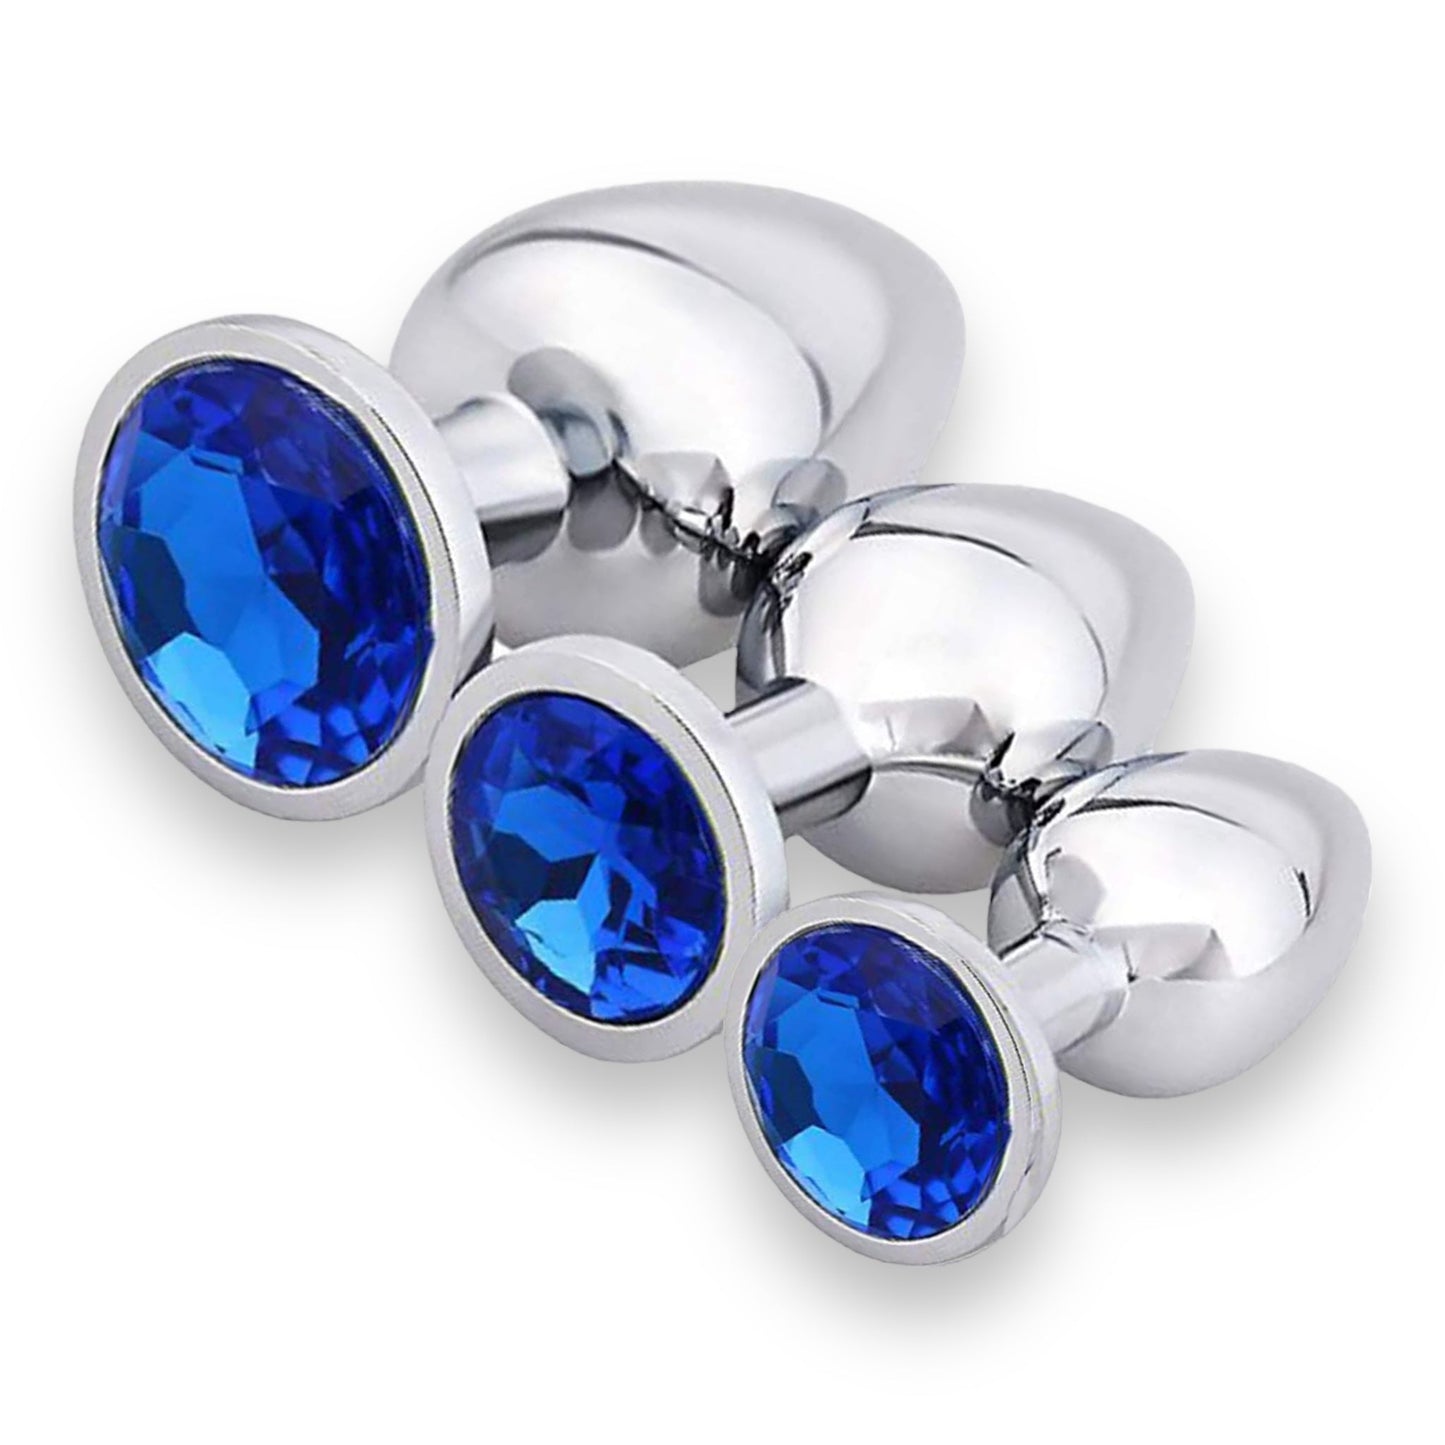 Metal Butt Plug Set of 3 Plugs in 3 sizes and in 6 different colors